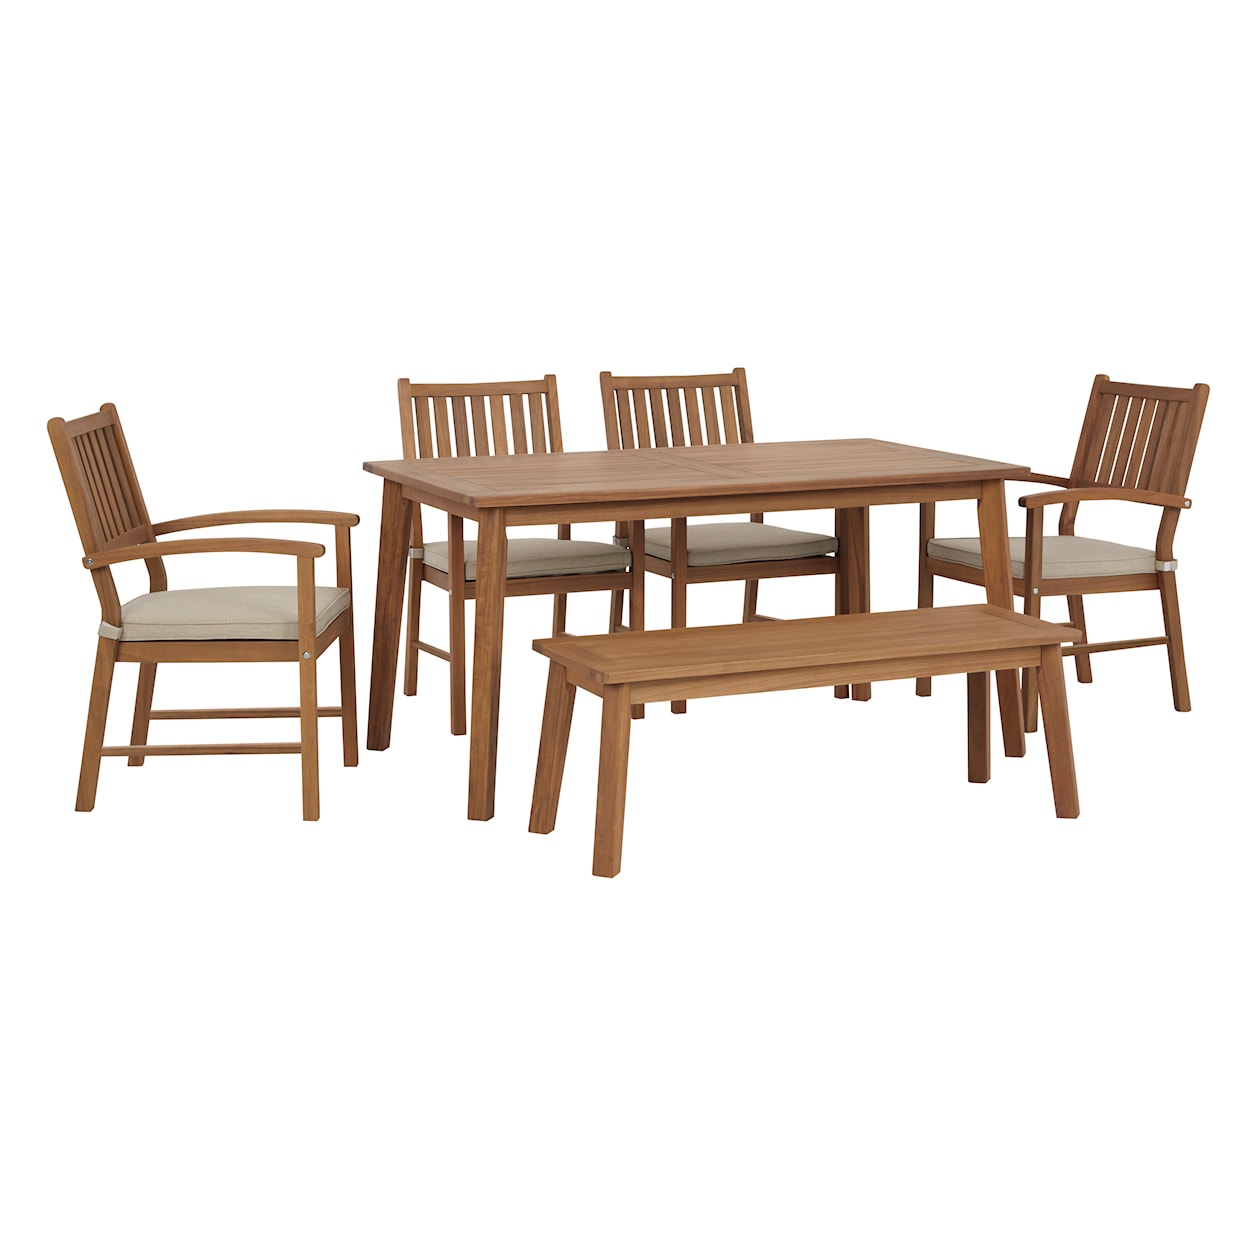 Signature Design Janiyah Outdoor Dining Table w/ 4 Chairs & Bench